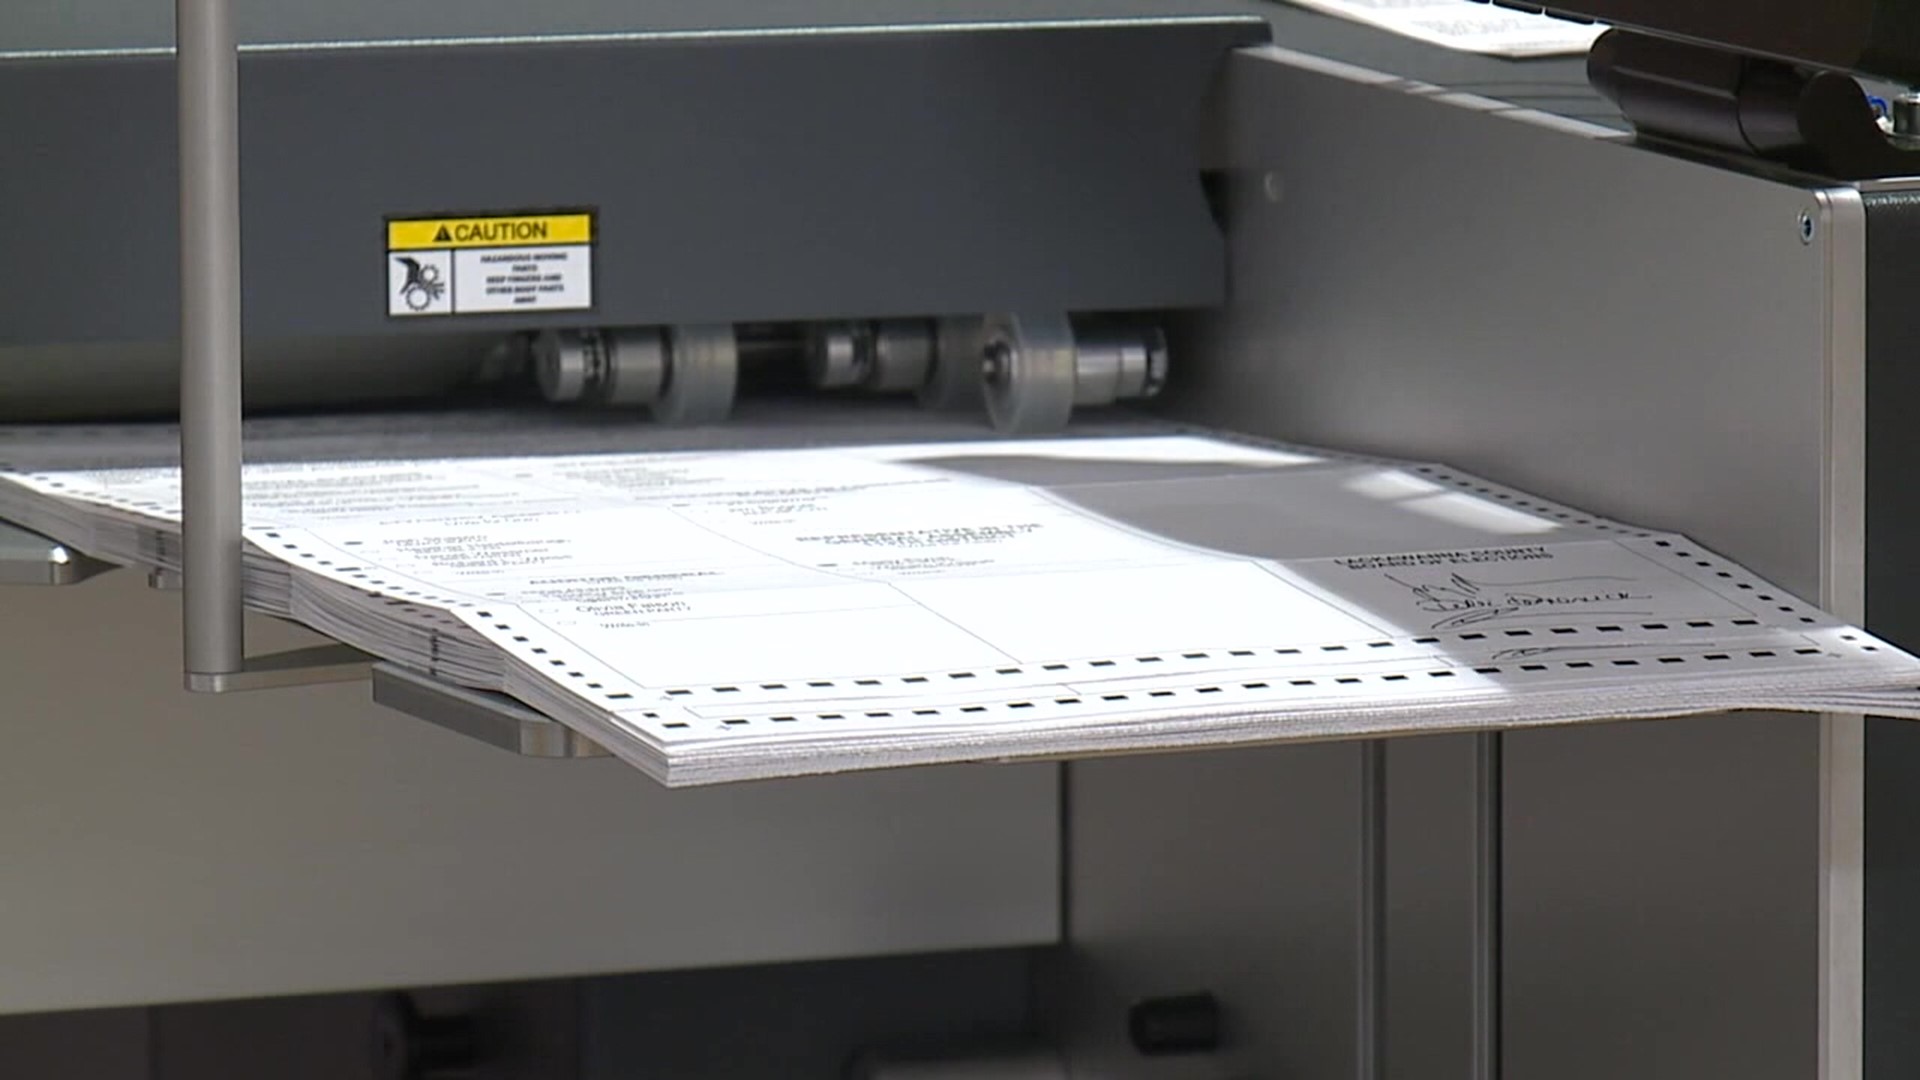 During Tuesday's primary, the polling location in Hunlock Township temporarily ran out of paper ballots.